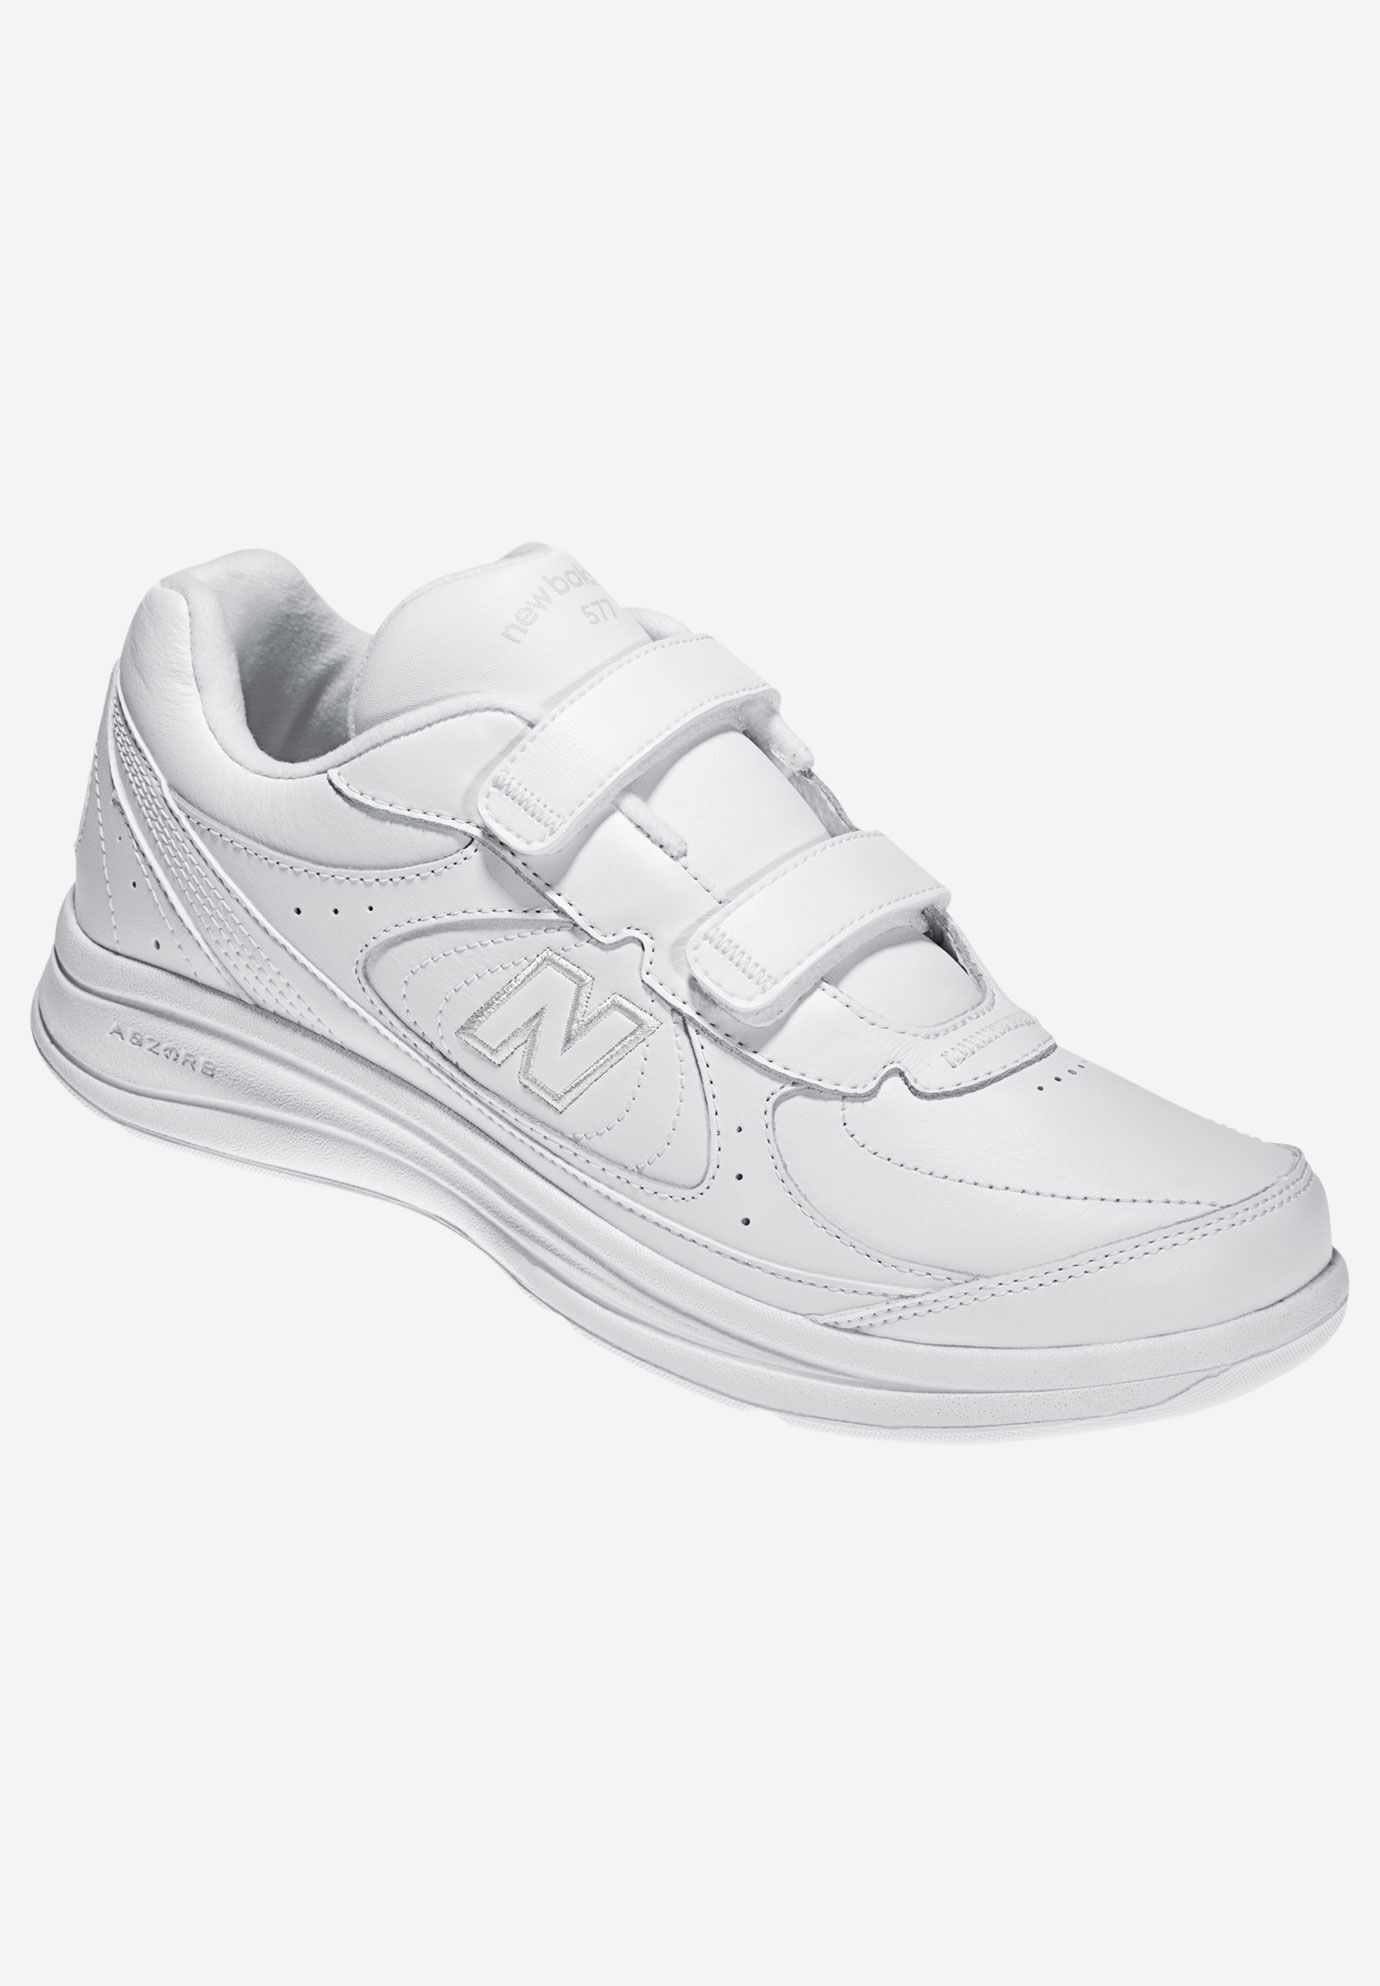 new balance shoes with velcro straps